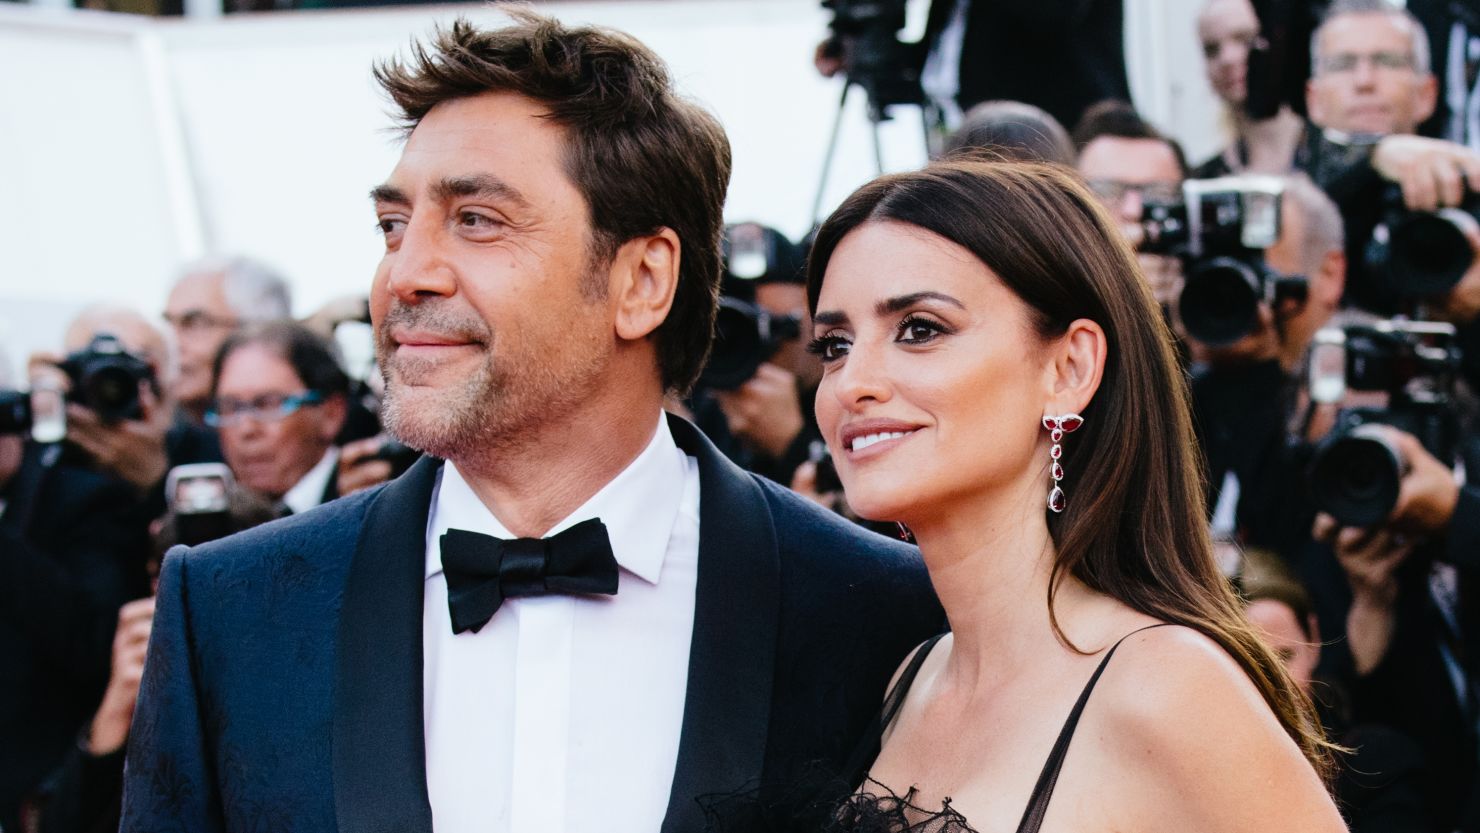 Penelope Cruz (R) with Javier Bardem (L) attend the screening of "Everybody Knows (Todos Lo Saben)" and the opening gala during the 71st annual Cannes Film Festival at Palais des Festivals on May 8, 2018 in Cannes, France.